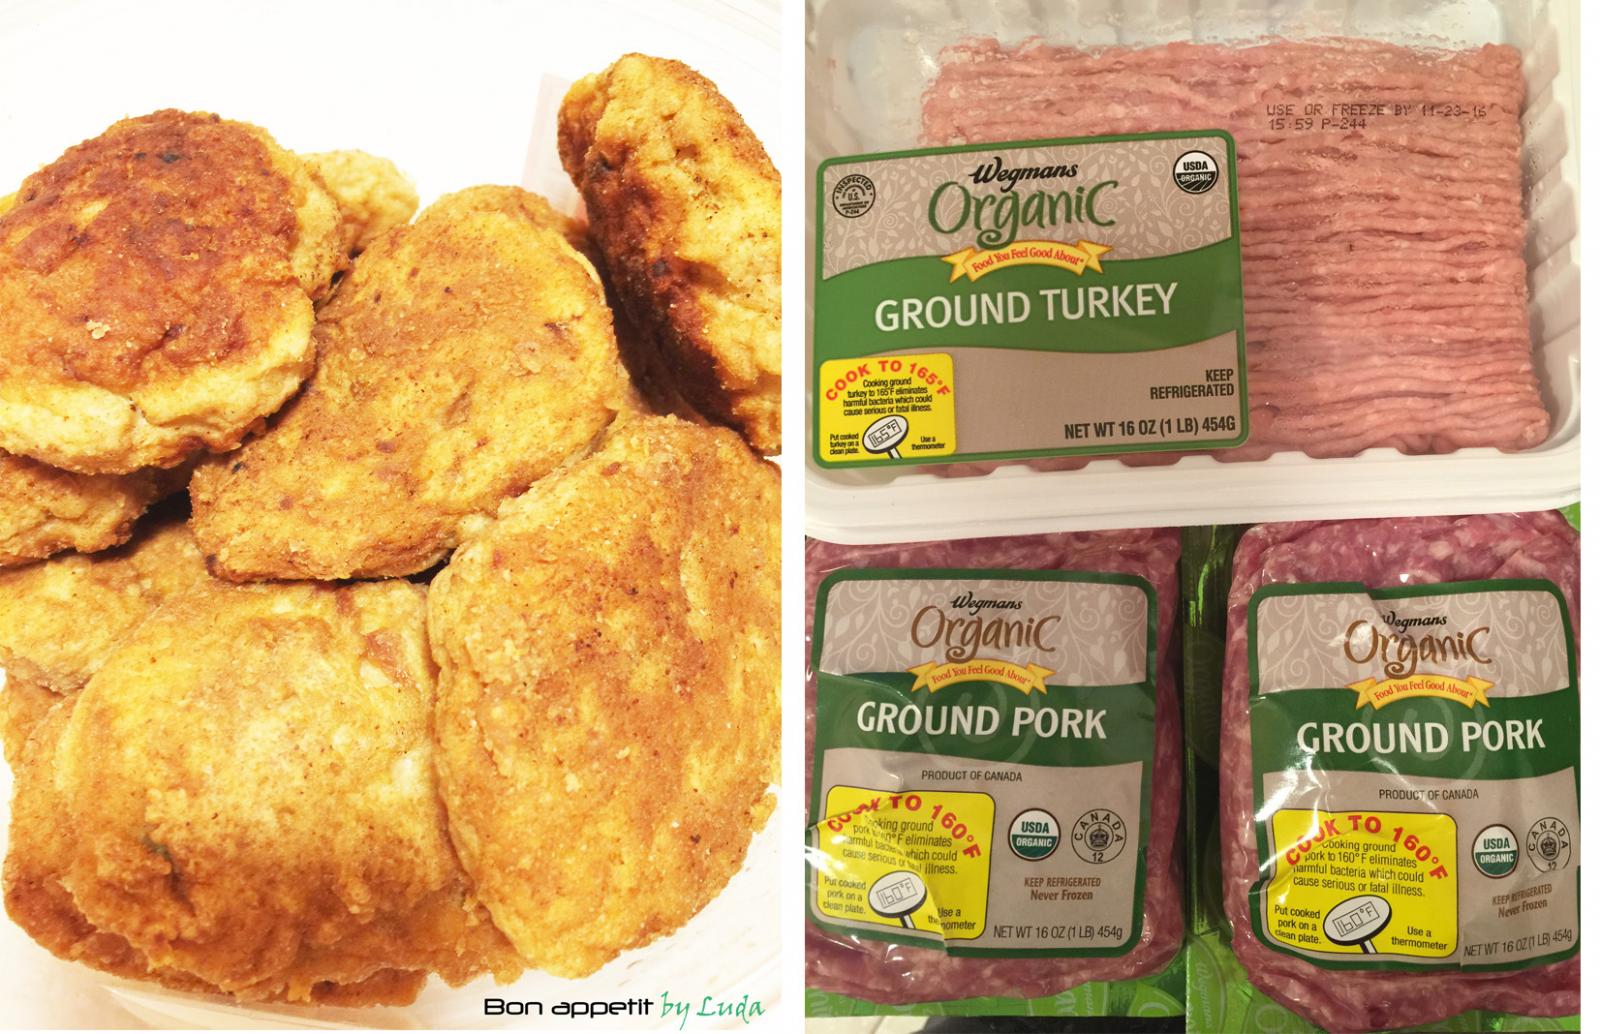 Super soft cutlets. Your kids will love it!